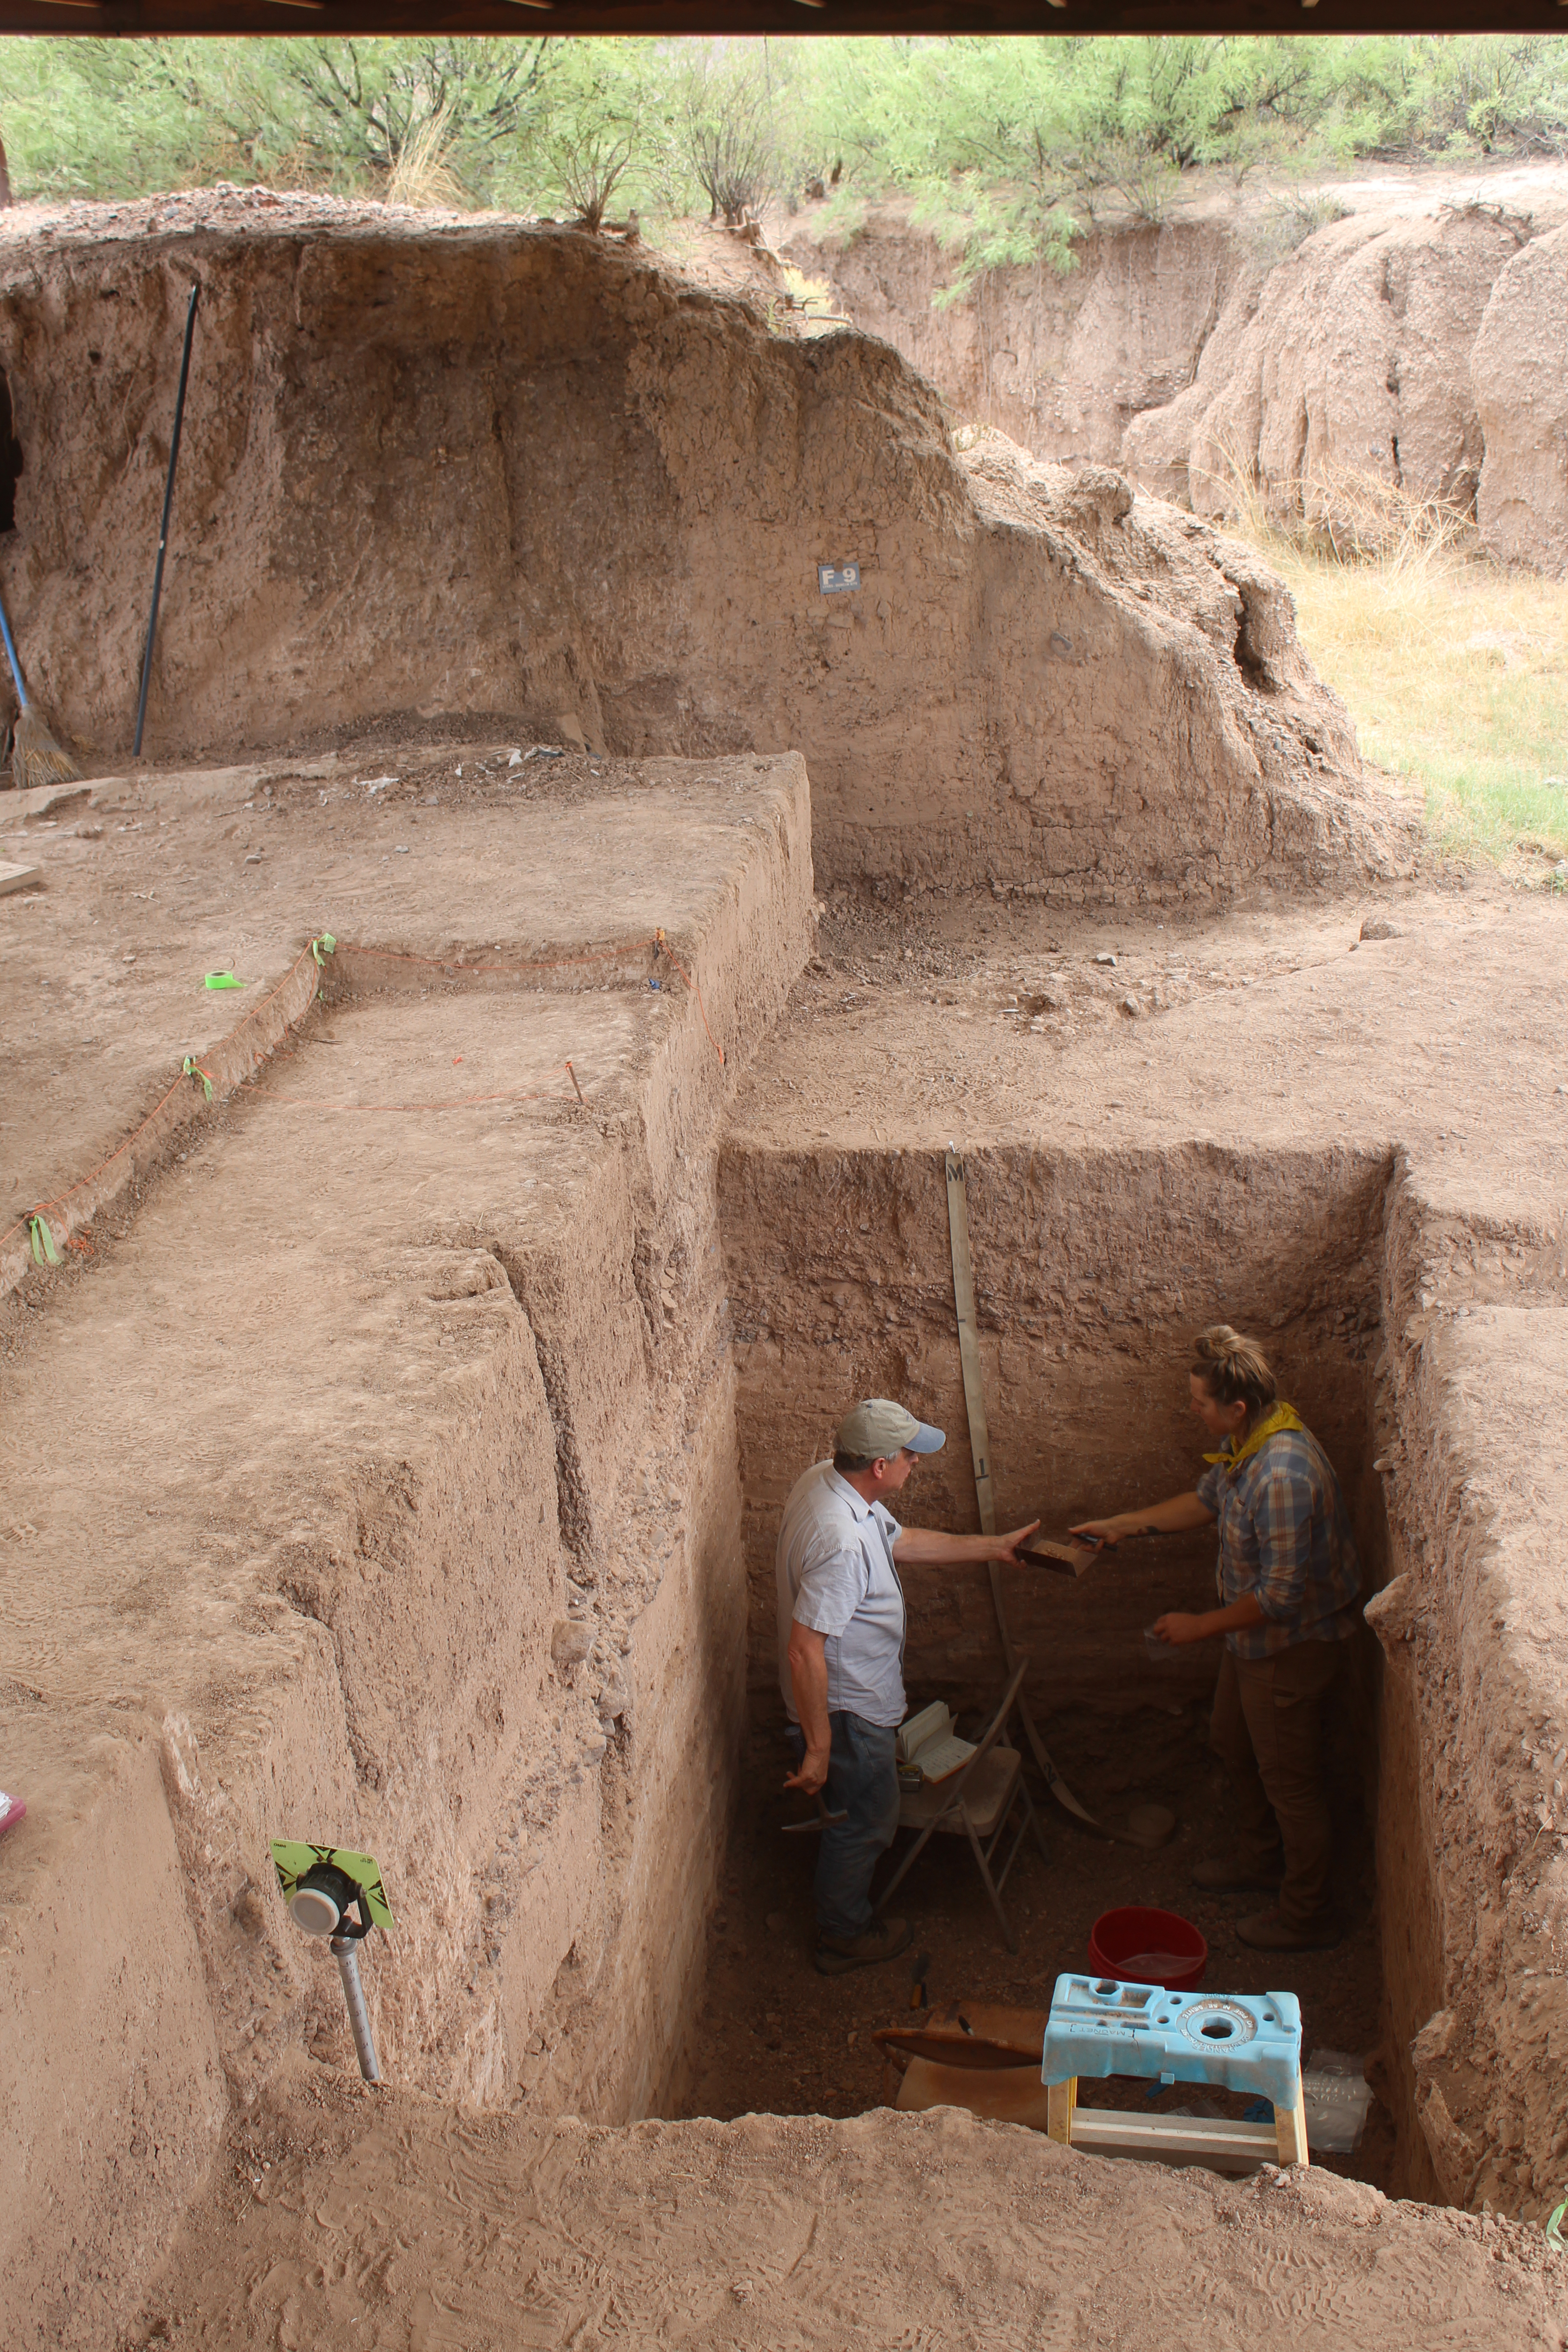 "Erika Blecha (right), archaeologist with the Center for Big Bend Studies at Sul Ross State University-Alpine, and Rolfe Mandel collect soil samples from an archaeological excavation at the Genevieve Lykes Duncan site in southwest Texas."